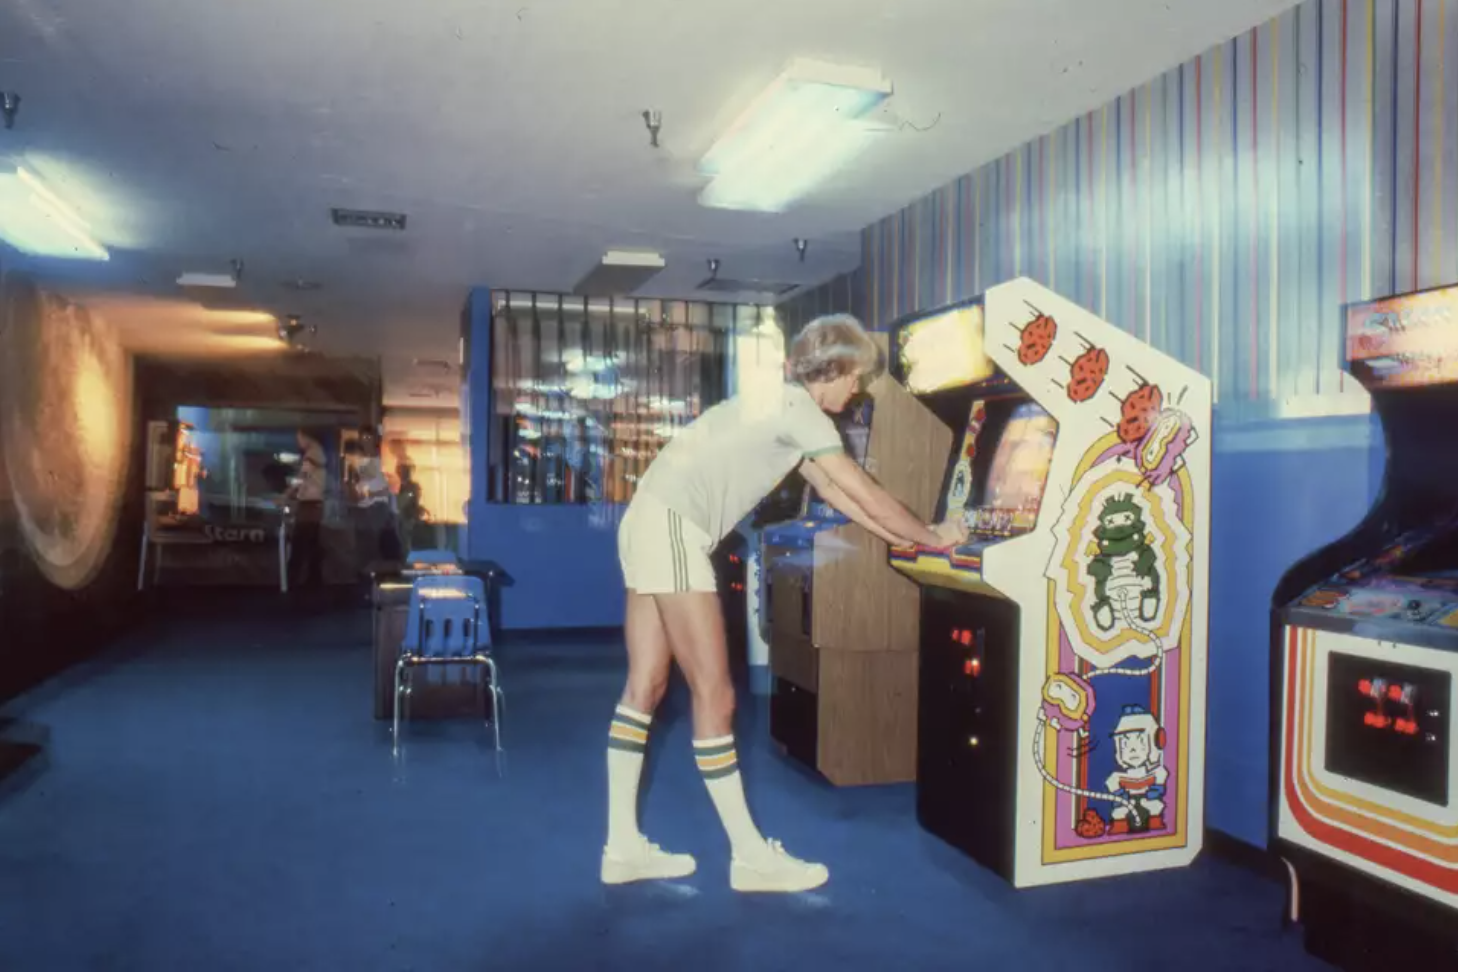 A young white man wearing short shorts and knee high tube socks plays an arcade game.